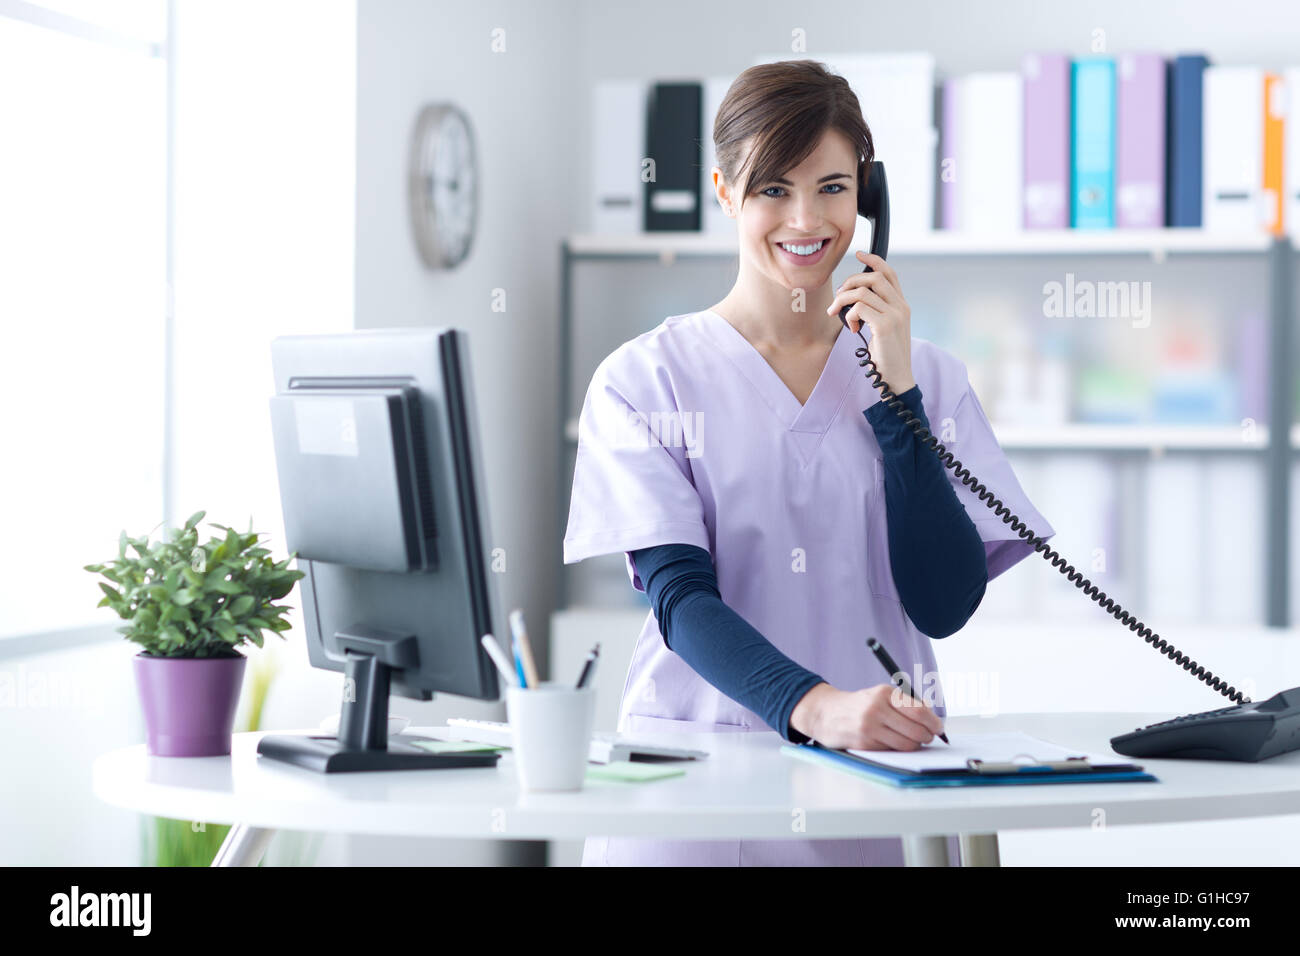 Young practitioner doctor working at the clinic reception desk, she is answering phone calls and scheduling appointments Stock Photo